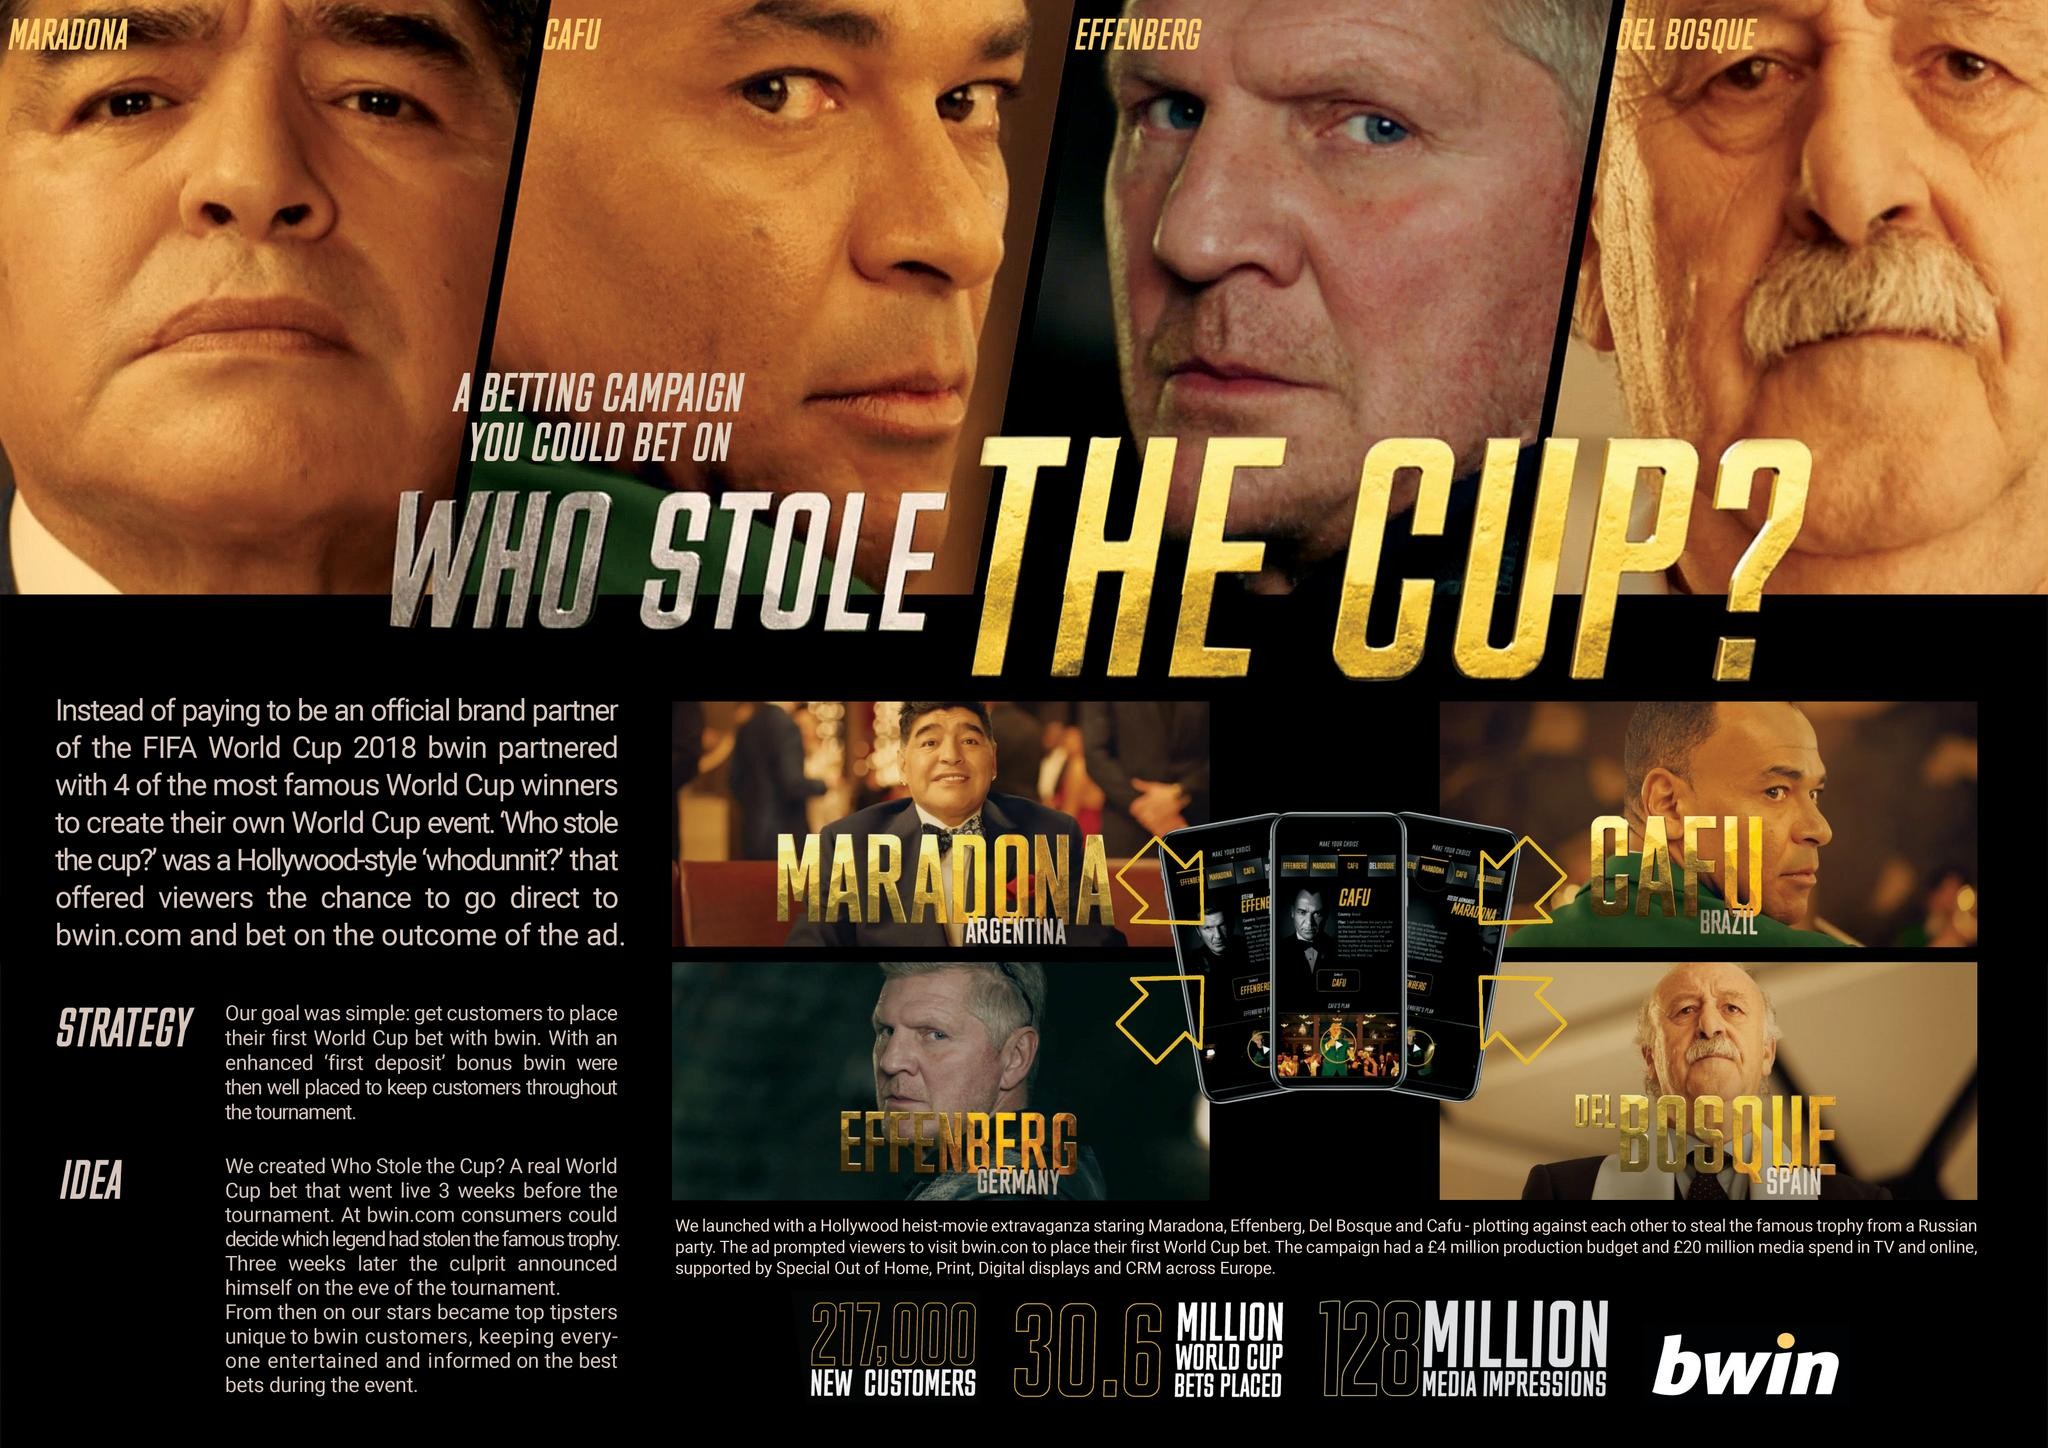 Who Stole The Cup?